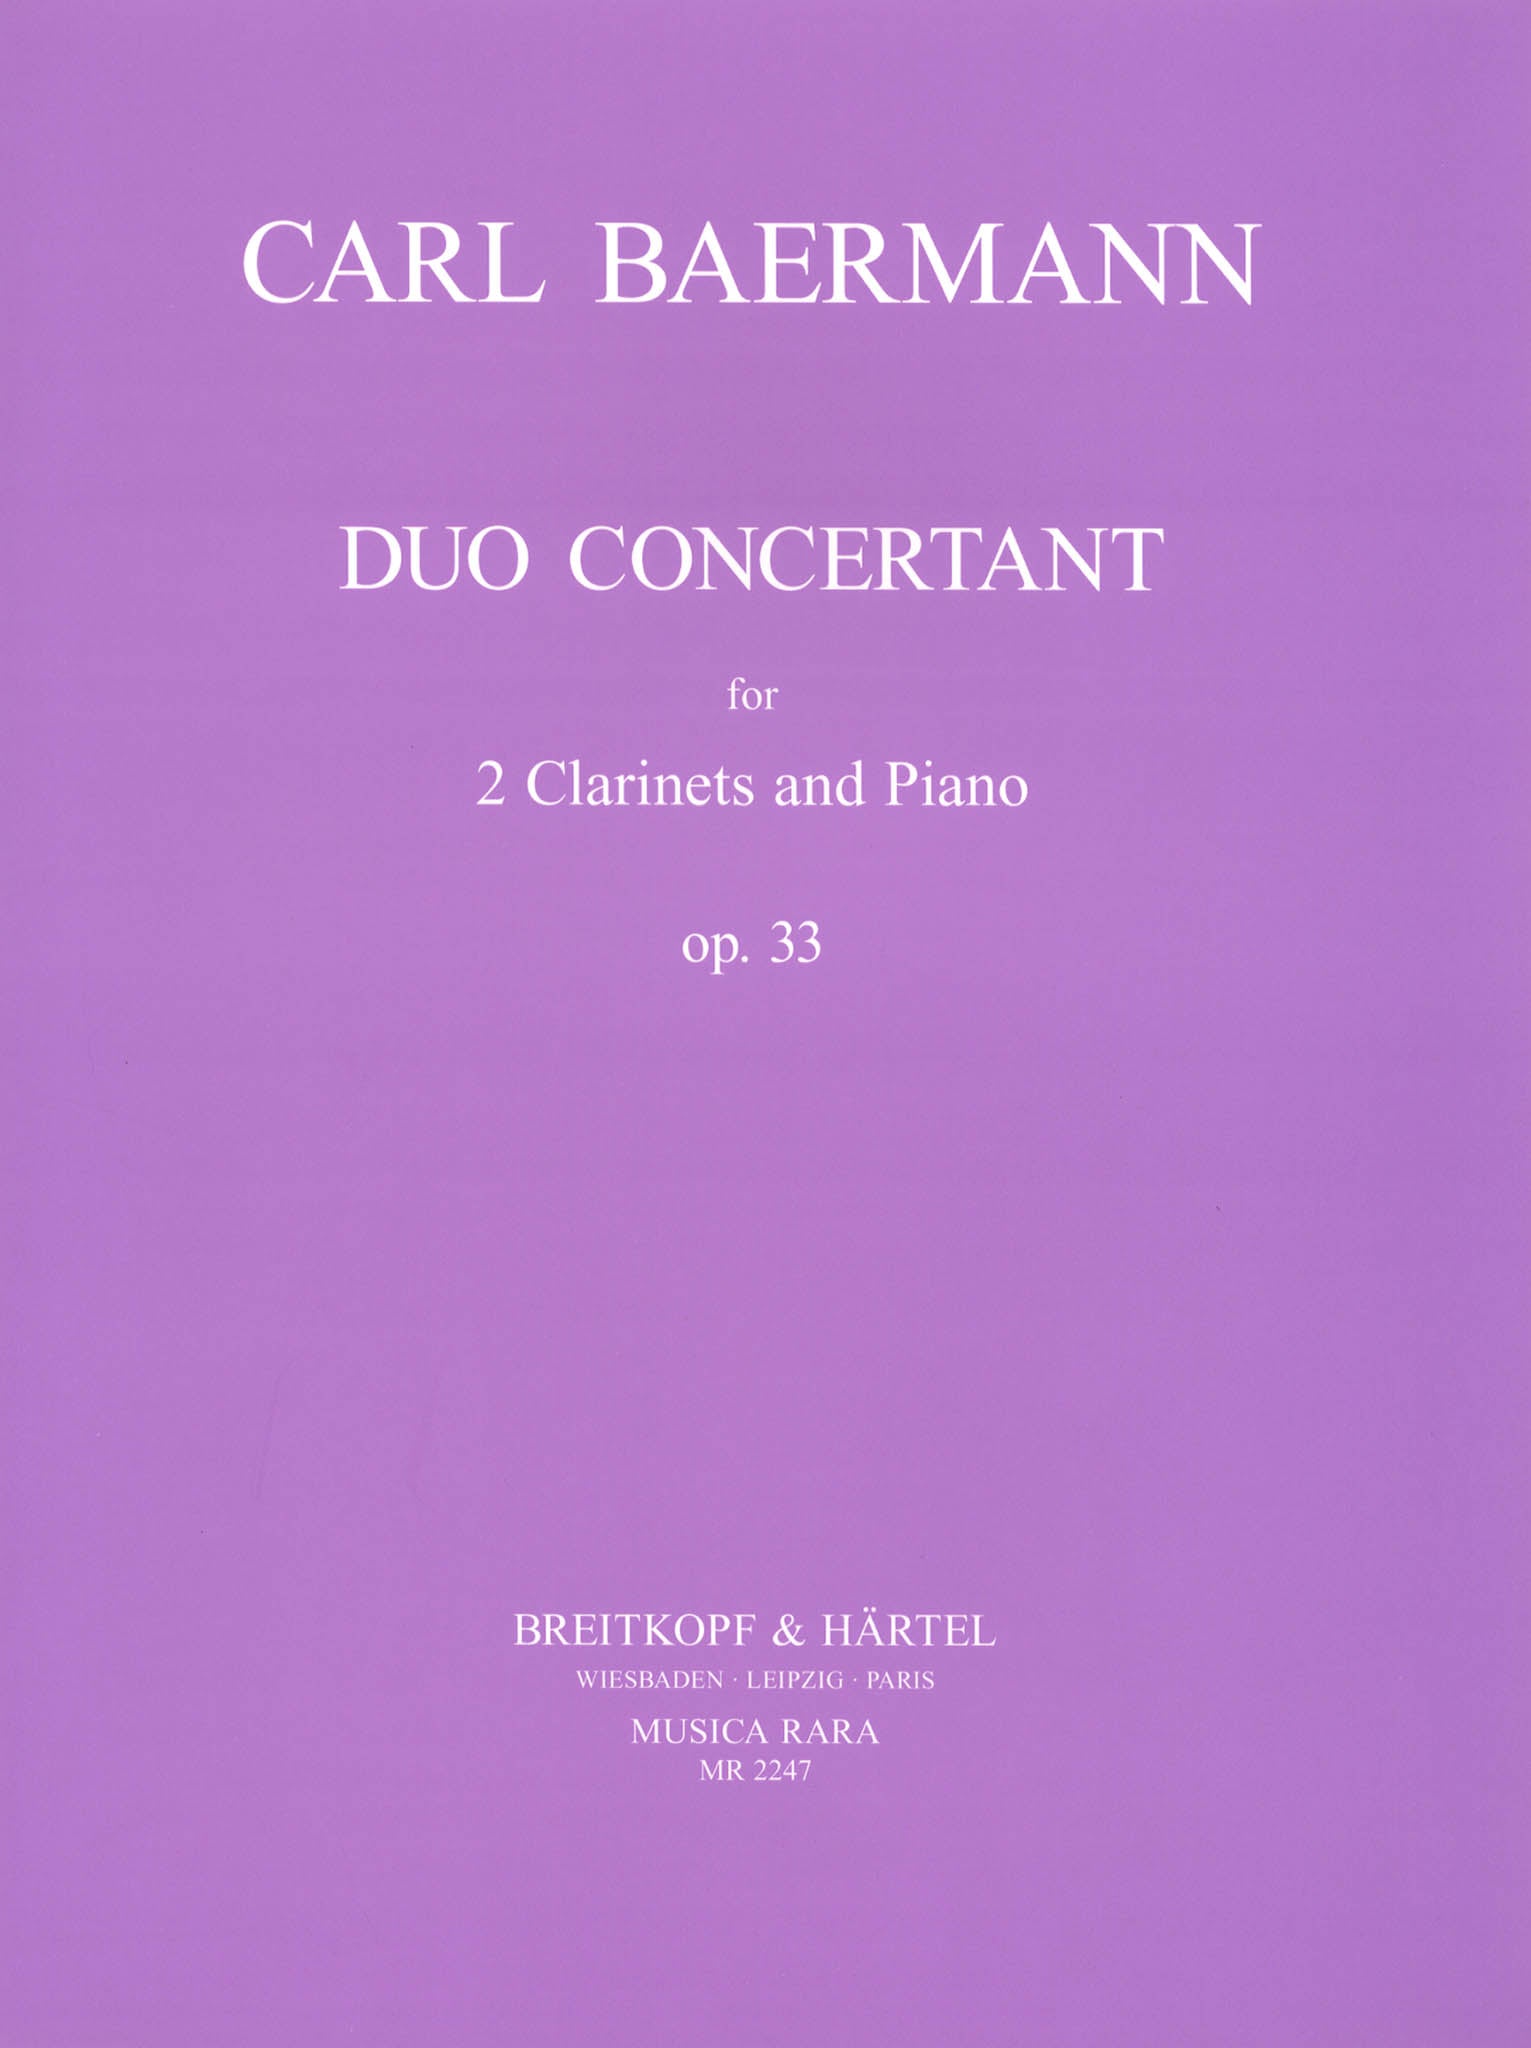 Carl Baermann Duo Concertant, Op. 33 piano reduction cover